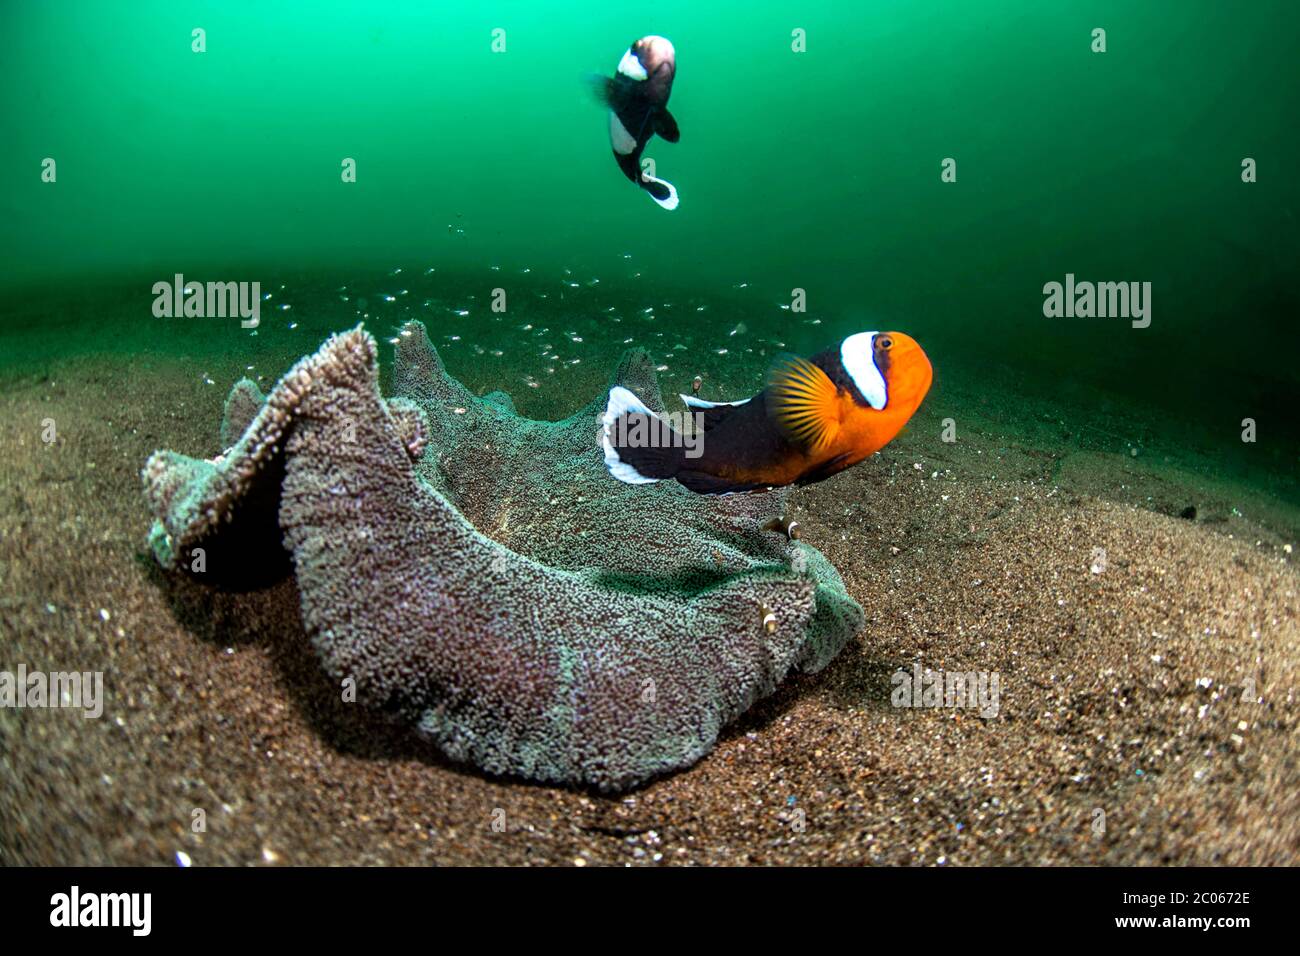 Pair of animals from Saddleback clownfish (Amphiprion polymnus) and Haddon's Carpet Anemone (Stichodactyla haddoni) with fry, Dauin, Philippines Stock Photo